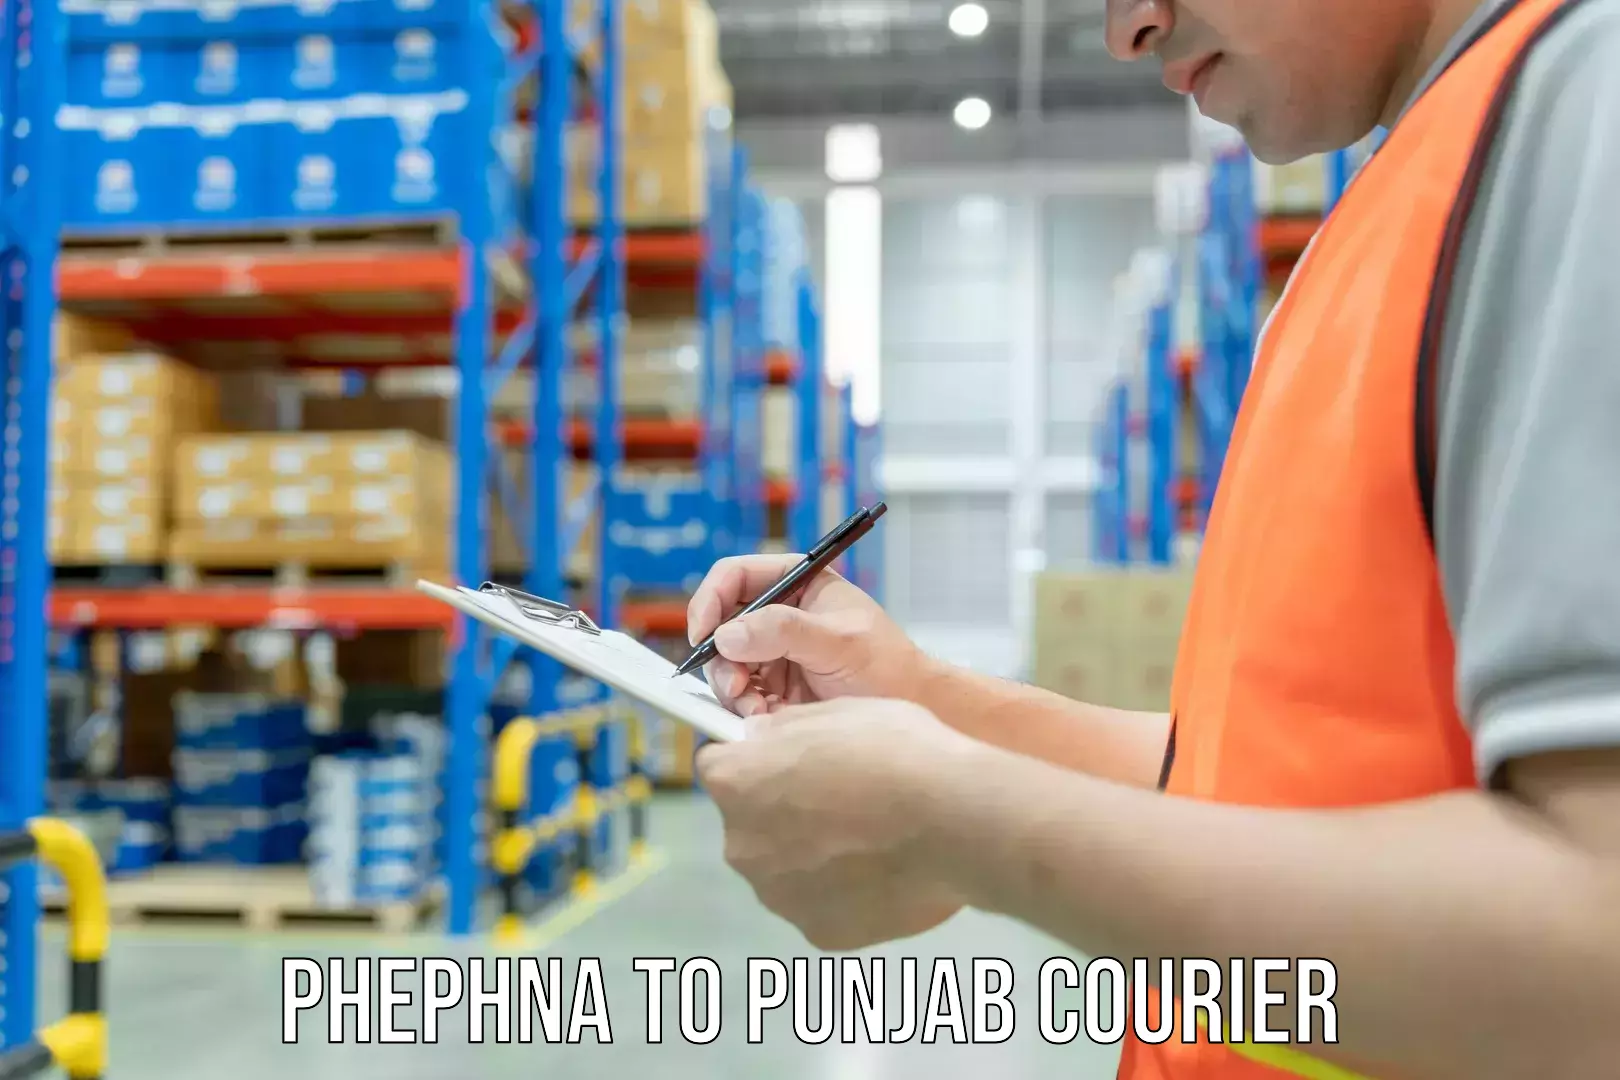 Moving and storage services in Phephna to Punjab